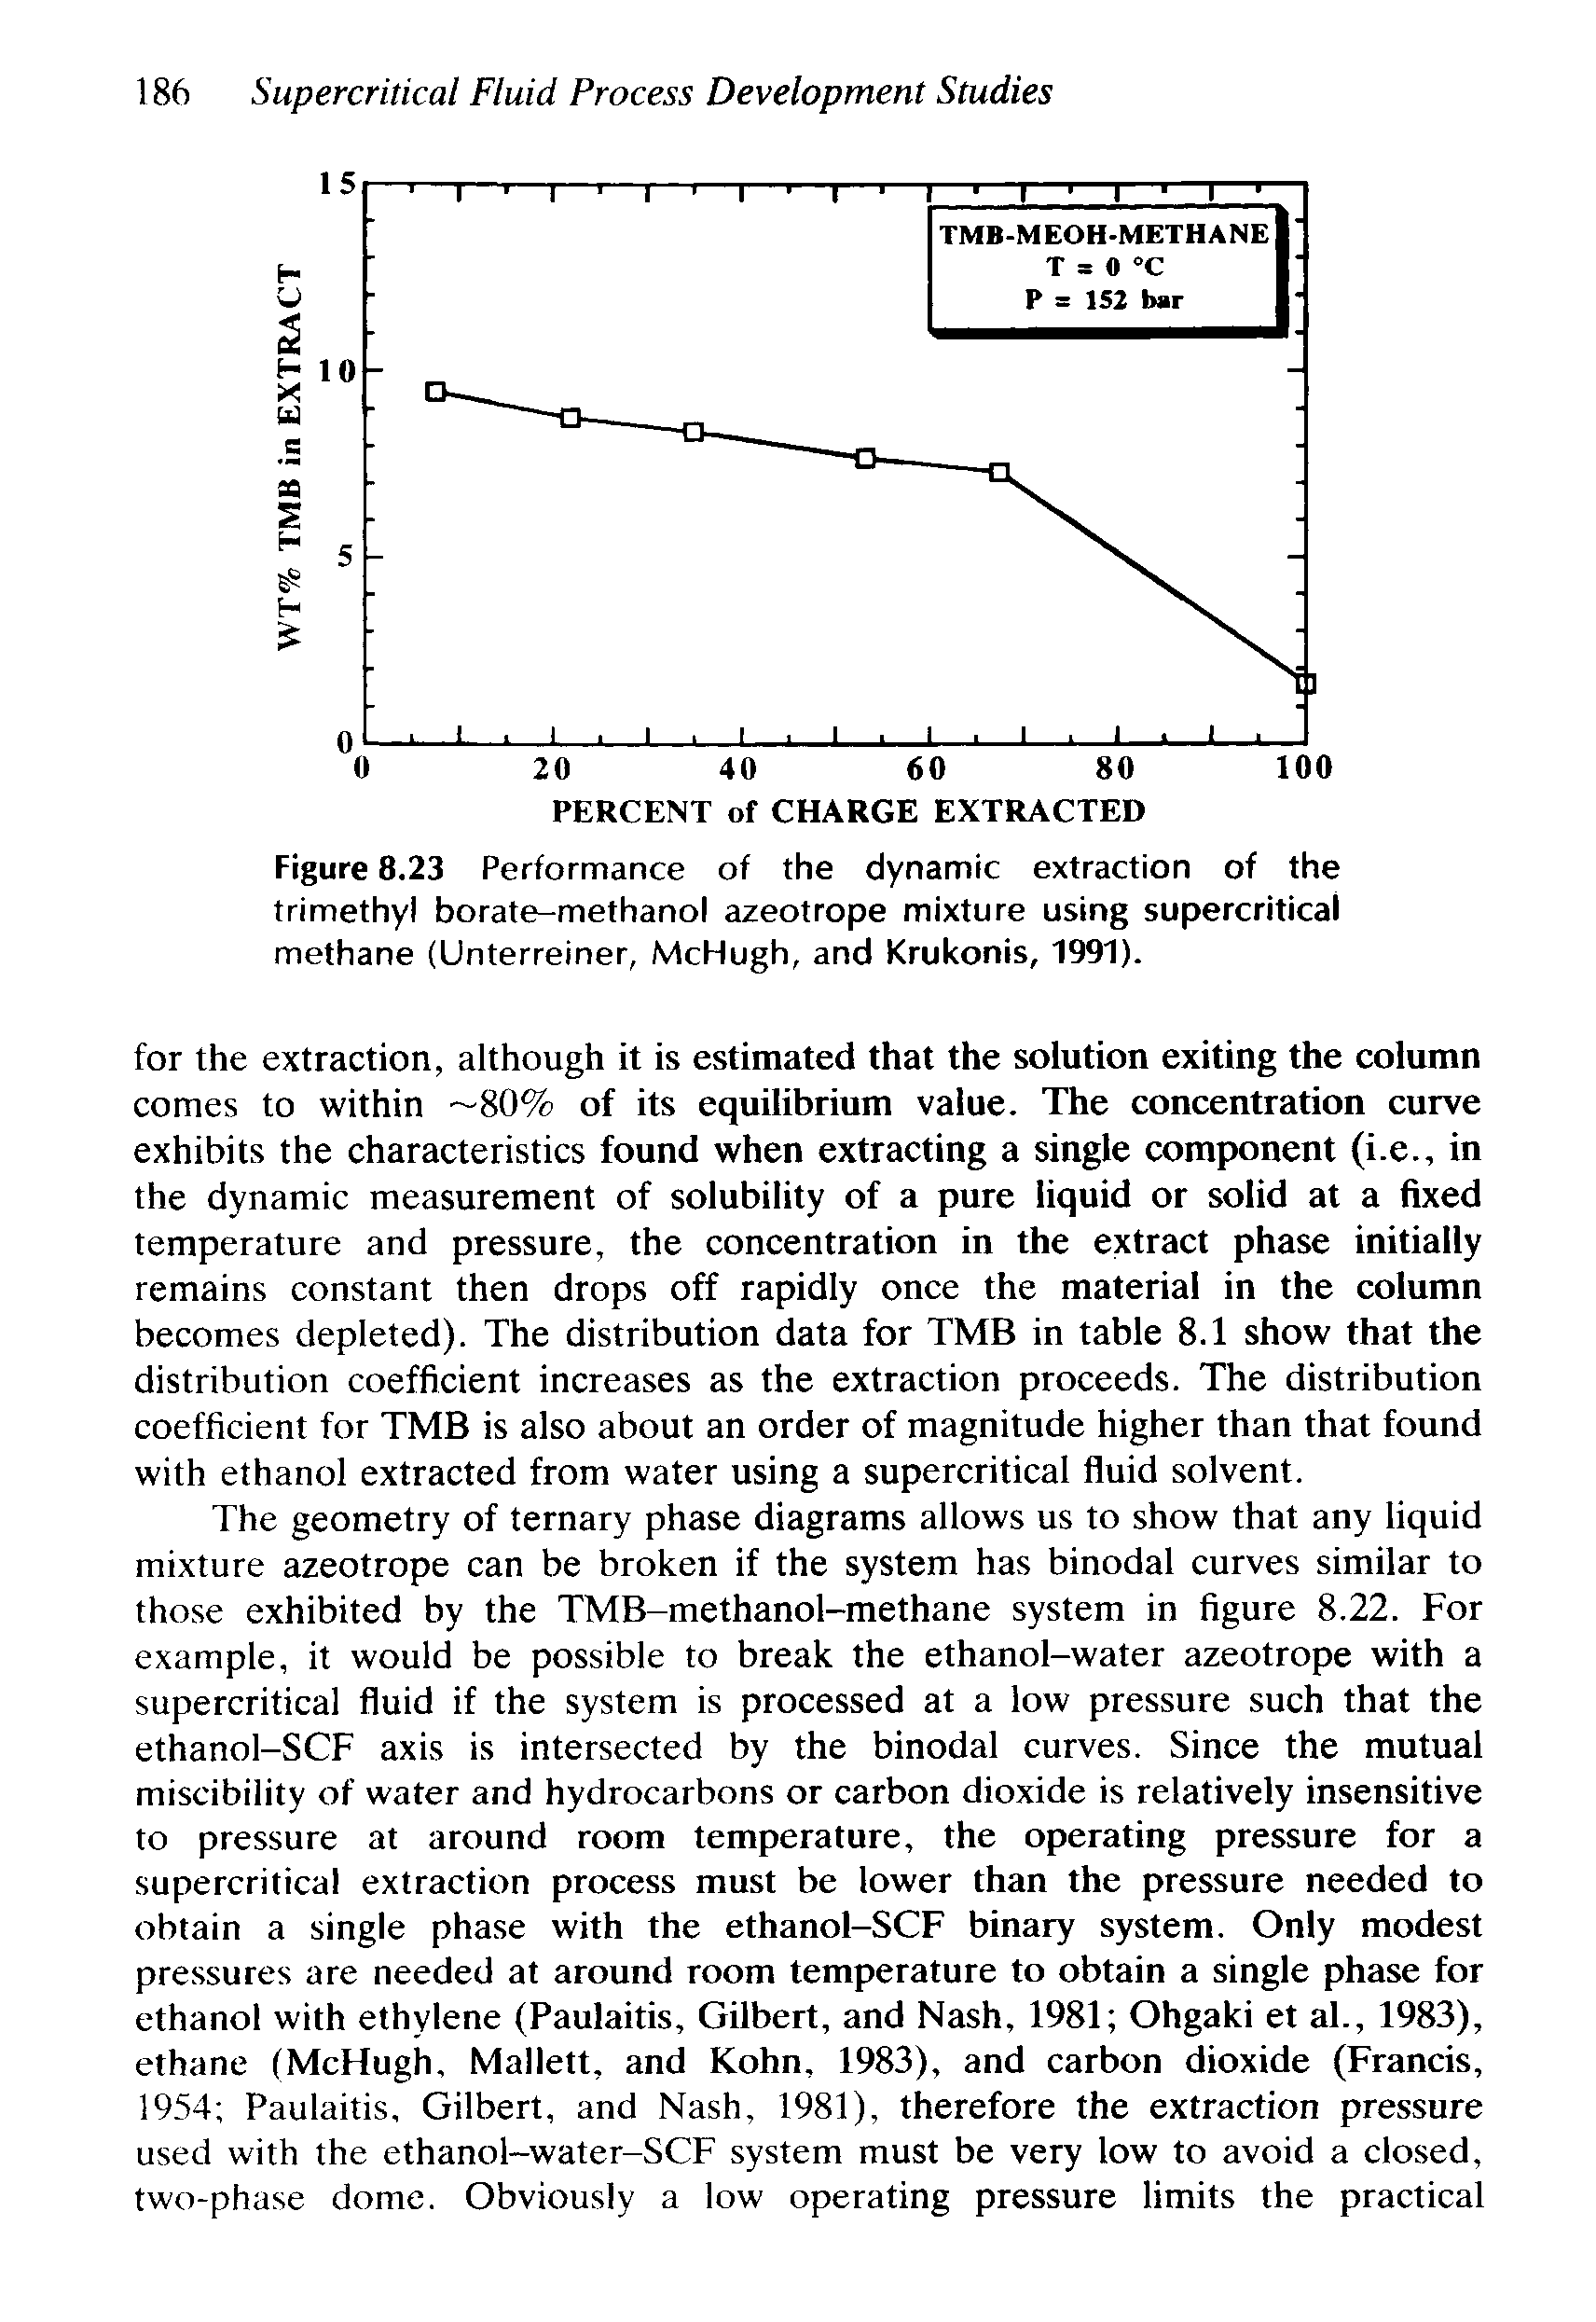 Figure 8.23 Performance of the dynamic extraction of the trimethyl borate-methanol azeotrope mixture using supercritical methane (Unterreiner, McHugh, and Krukonis, 1991).